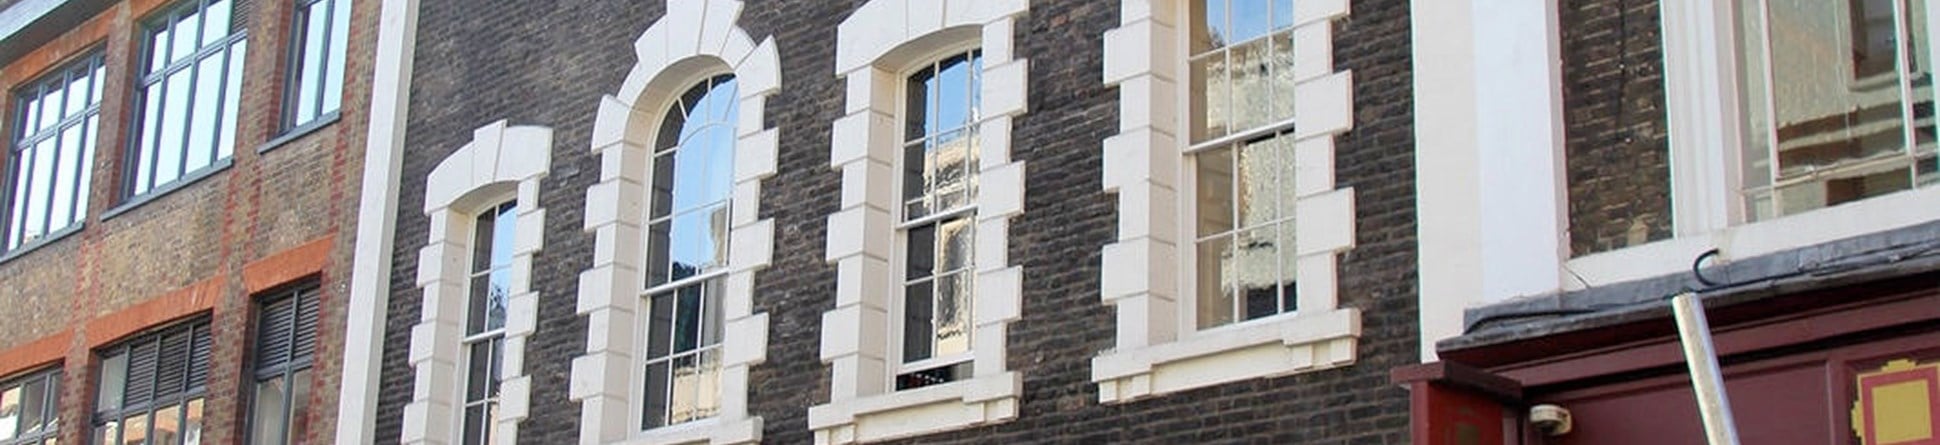 Georgian building with rusticated window surrounds.